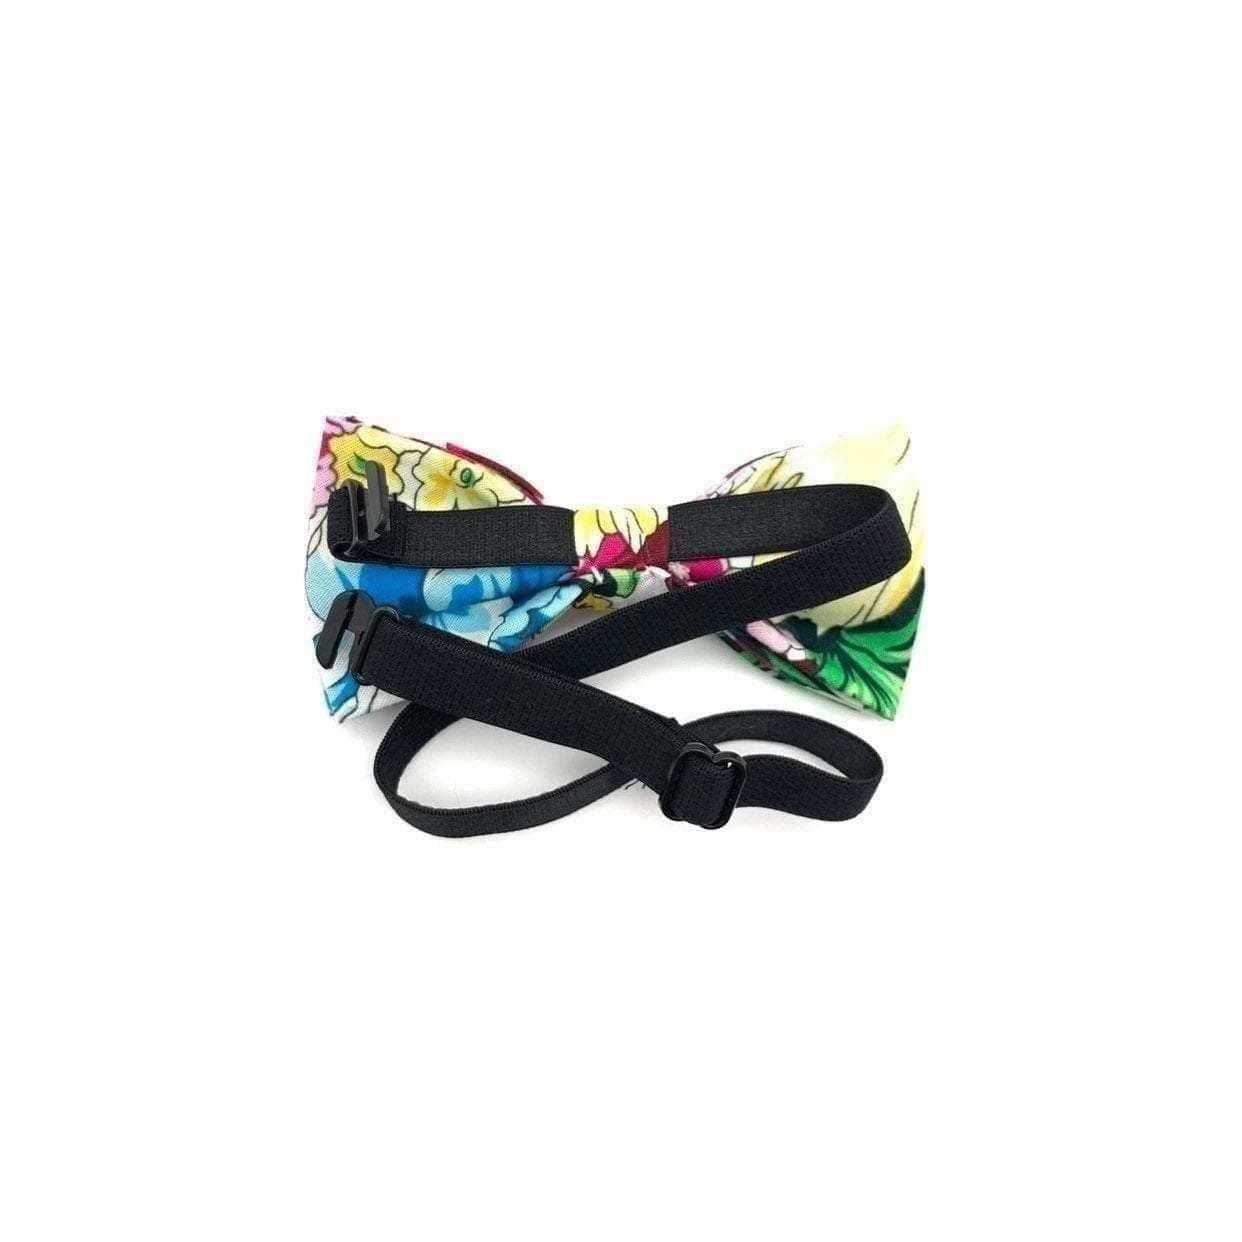 Kids Floral Pre-Tied Bow Tie Mytieshop - BYRON-The perfect accessory for your little one's next formal event, this BYRON Kids Floral Pre-Tied Bow Tie is sure to make them look dapper. Made from high-quality materials, this bow tie features a beautiful floral design that is perfect for spring and summer occasions. The pre-tied design makes it easy to put on and take off, so your little one can focus on enjoying their special day. Strap is adjustablePre-Tied bowtieBow Tie 10.5 * 6CMSpecificsItem T